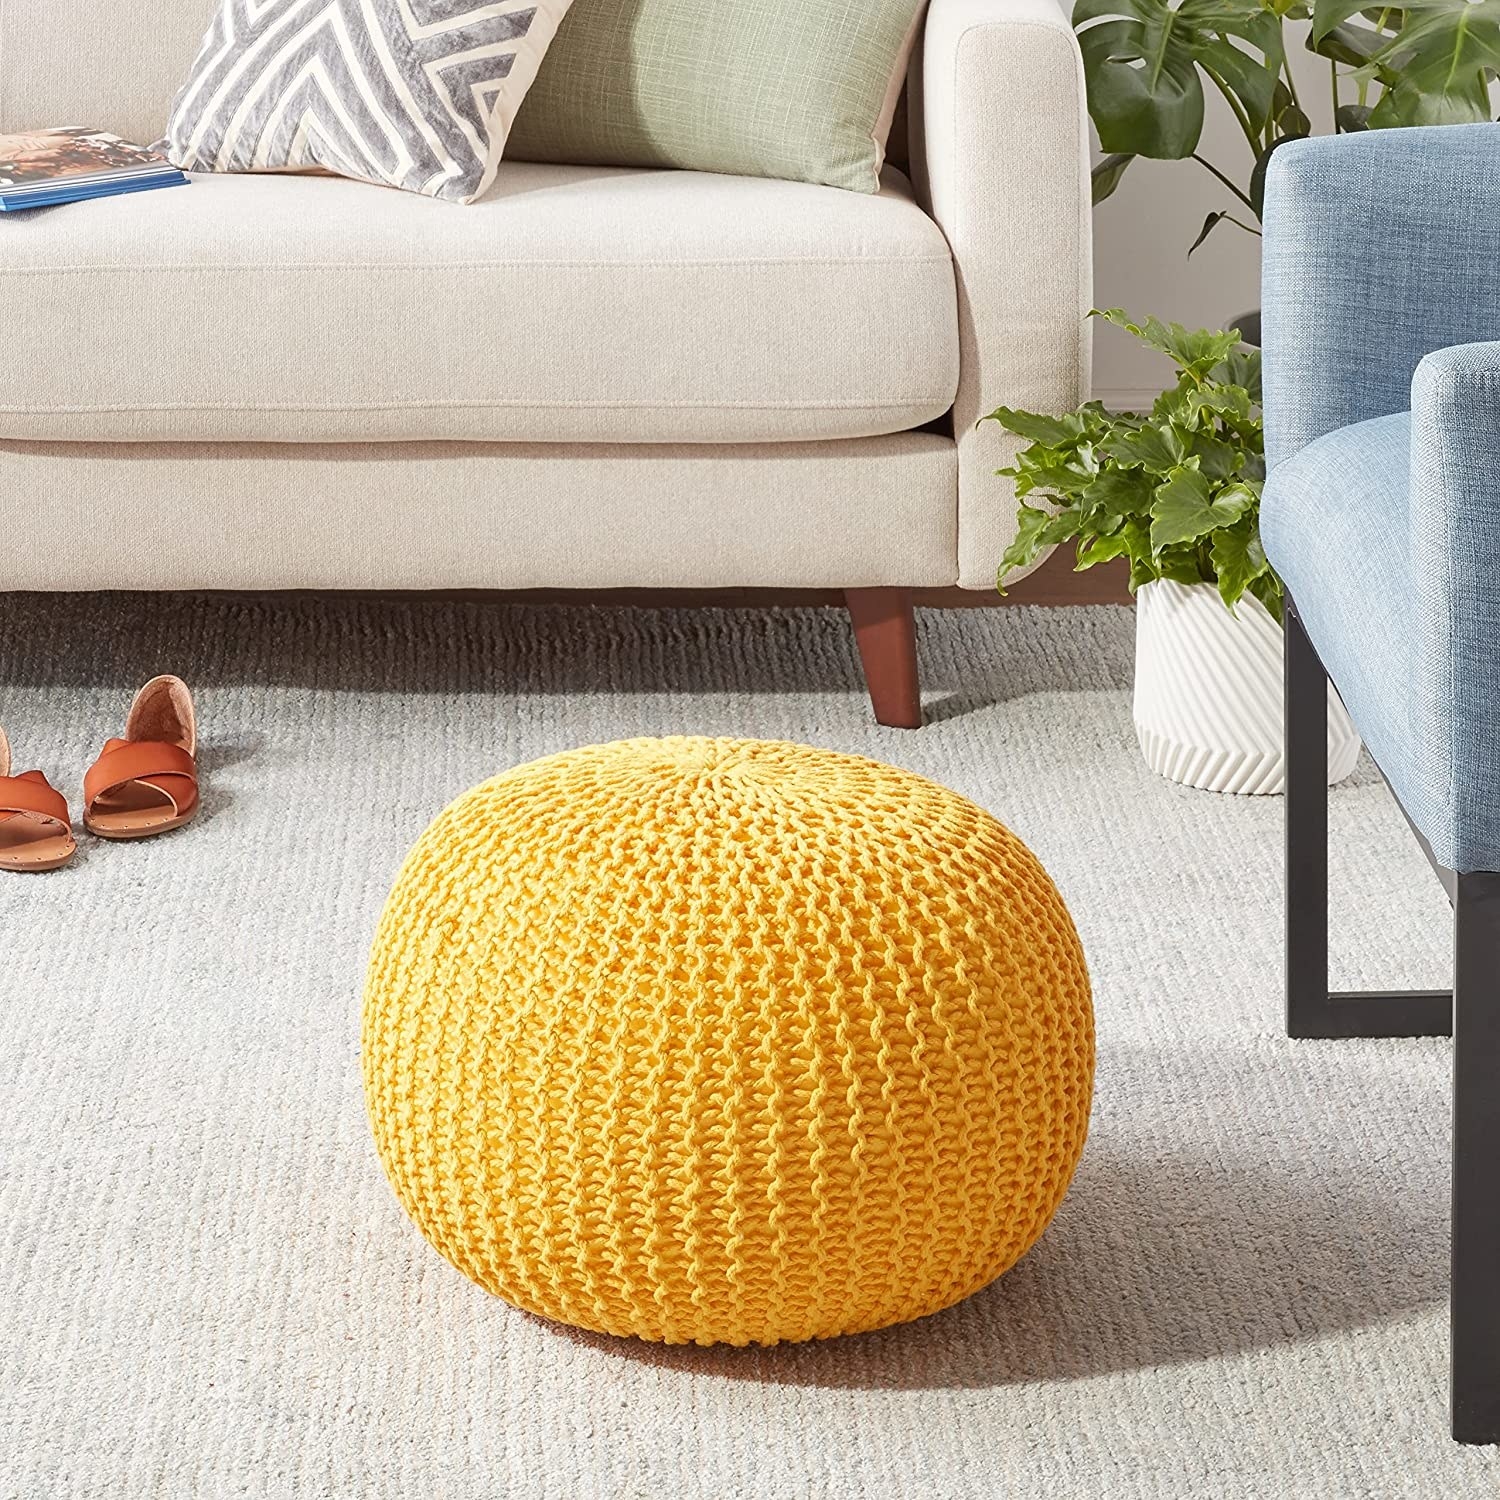 The pouf in the middle of a living room